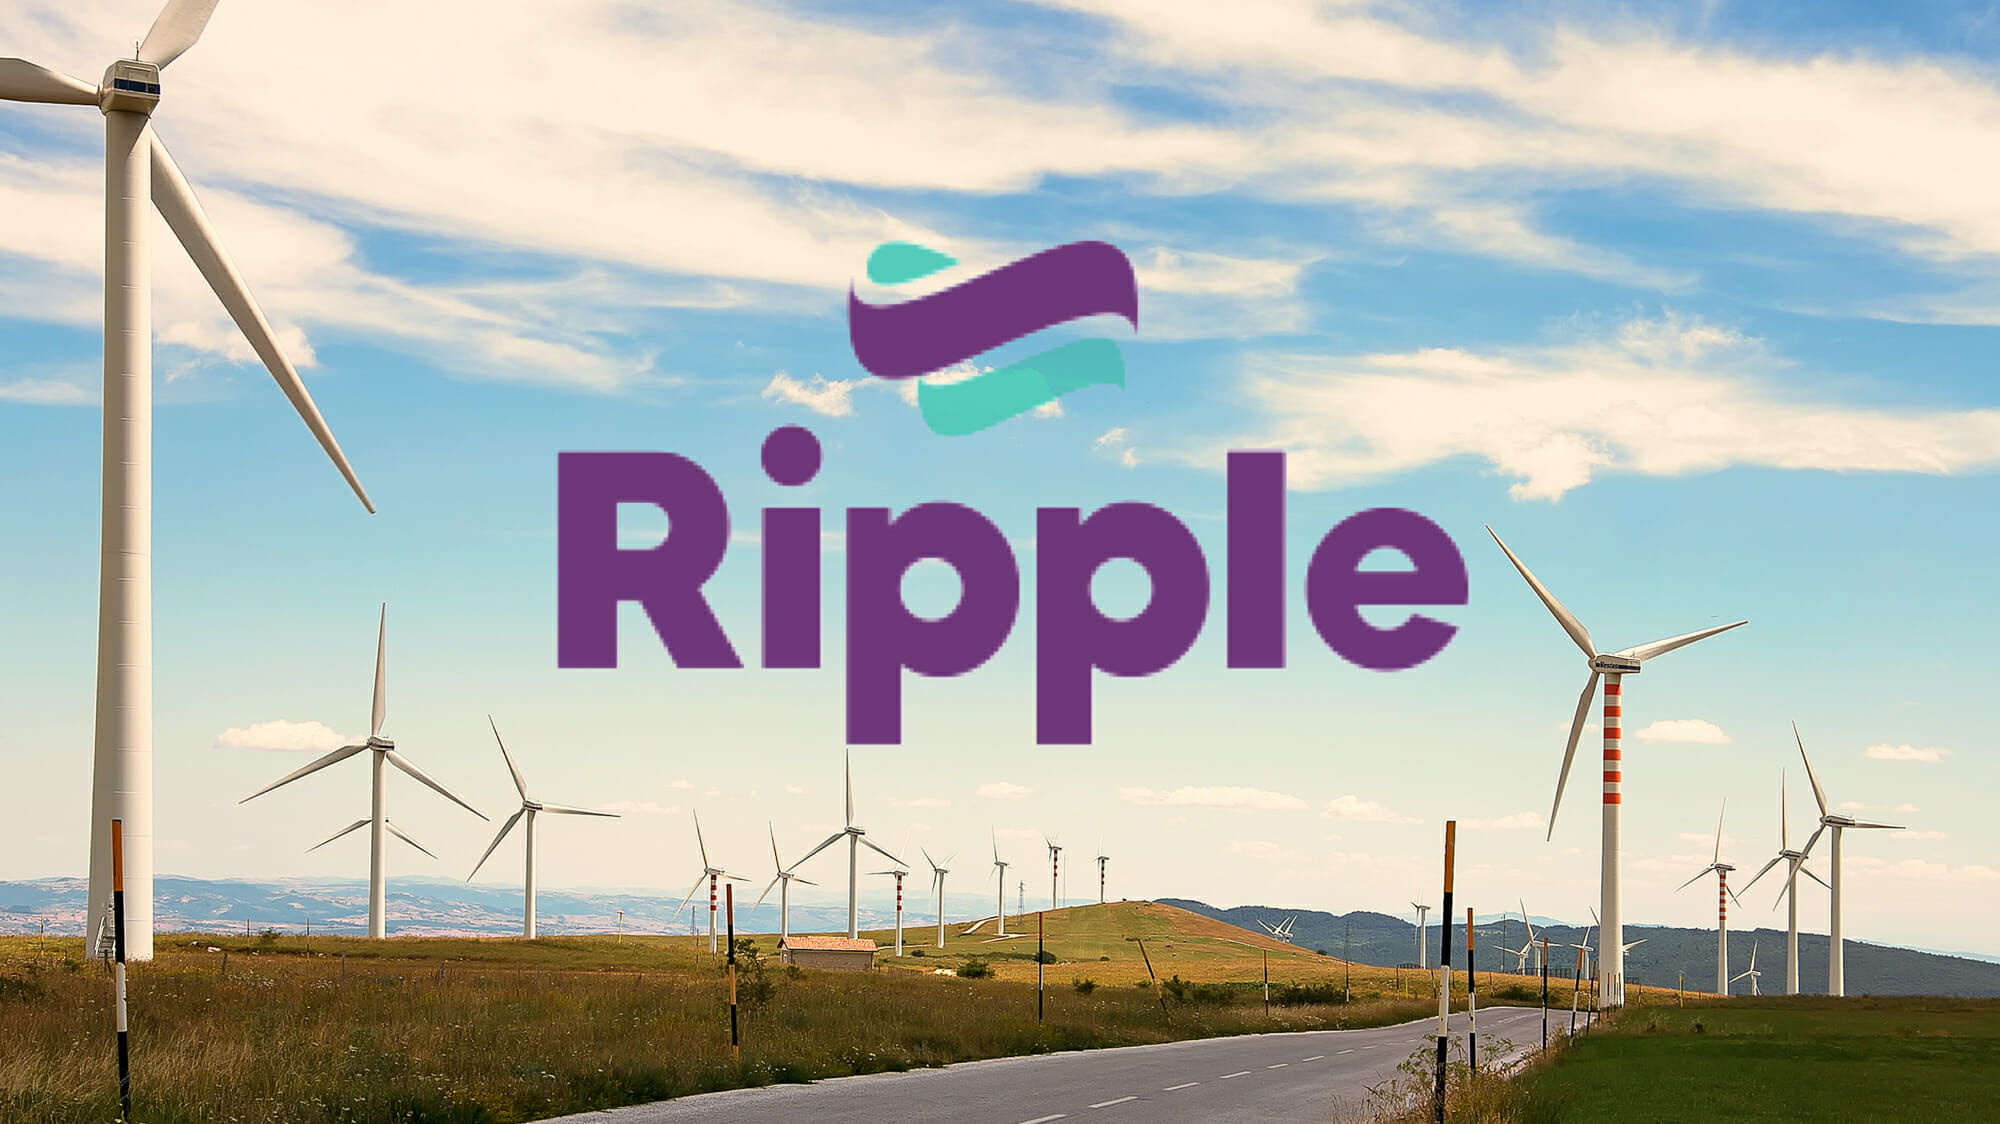 Ripple Energy making waves with new wind farm Featured Image